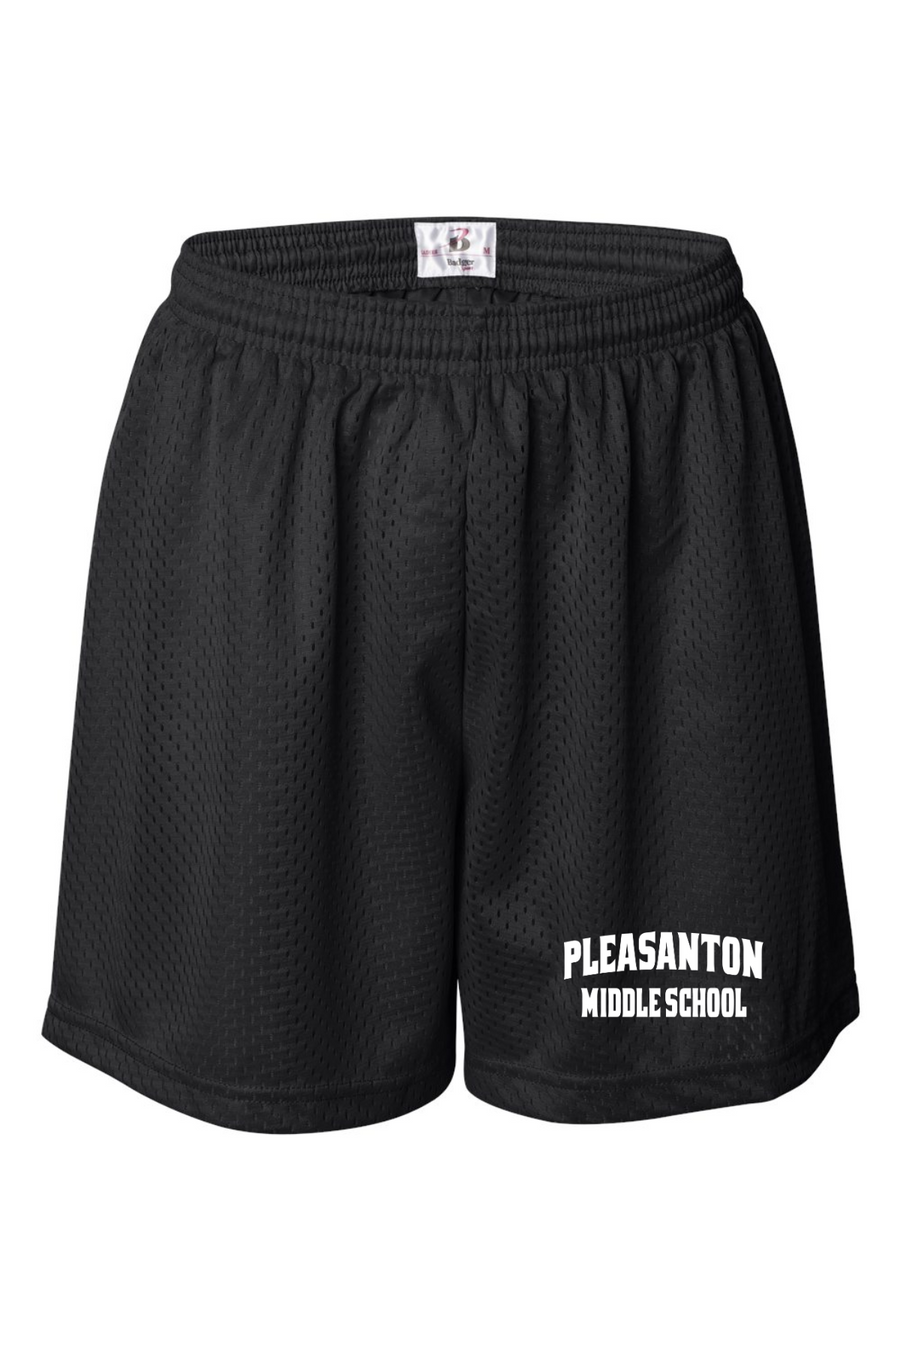 Pleasanton Middle School Physical Education-Womens Pro Mesh 5-inch Inseam Shorts with Solid Liner